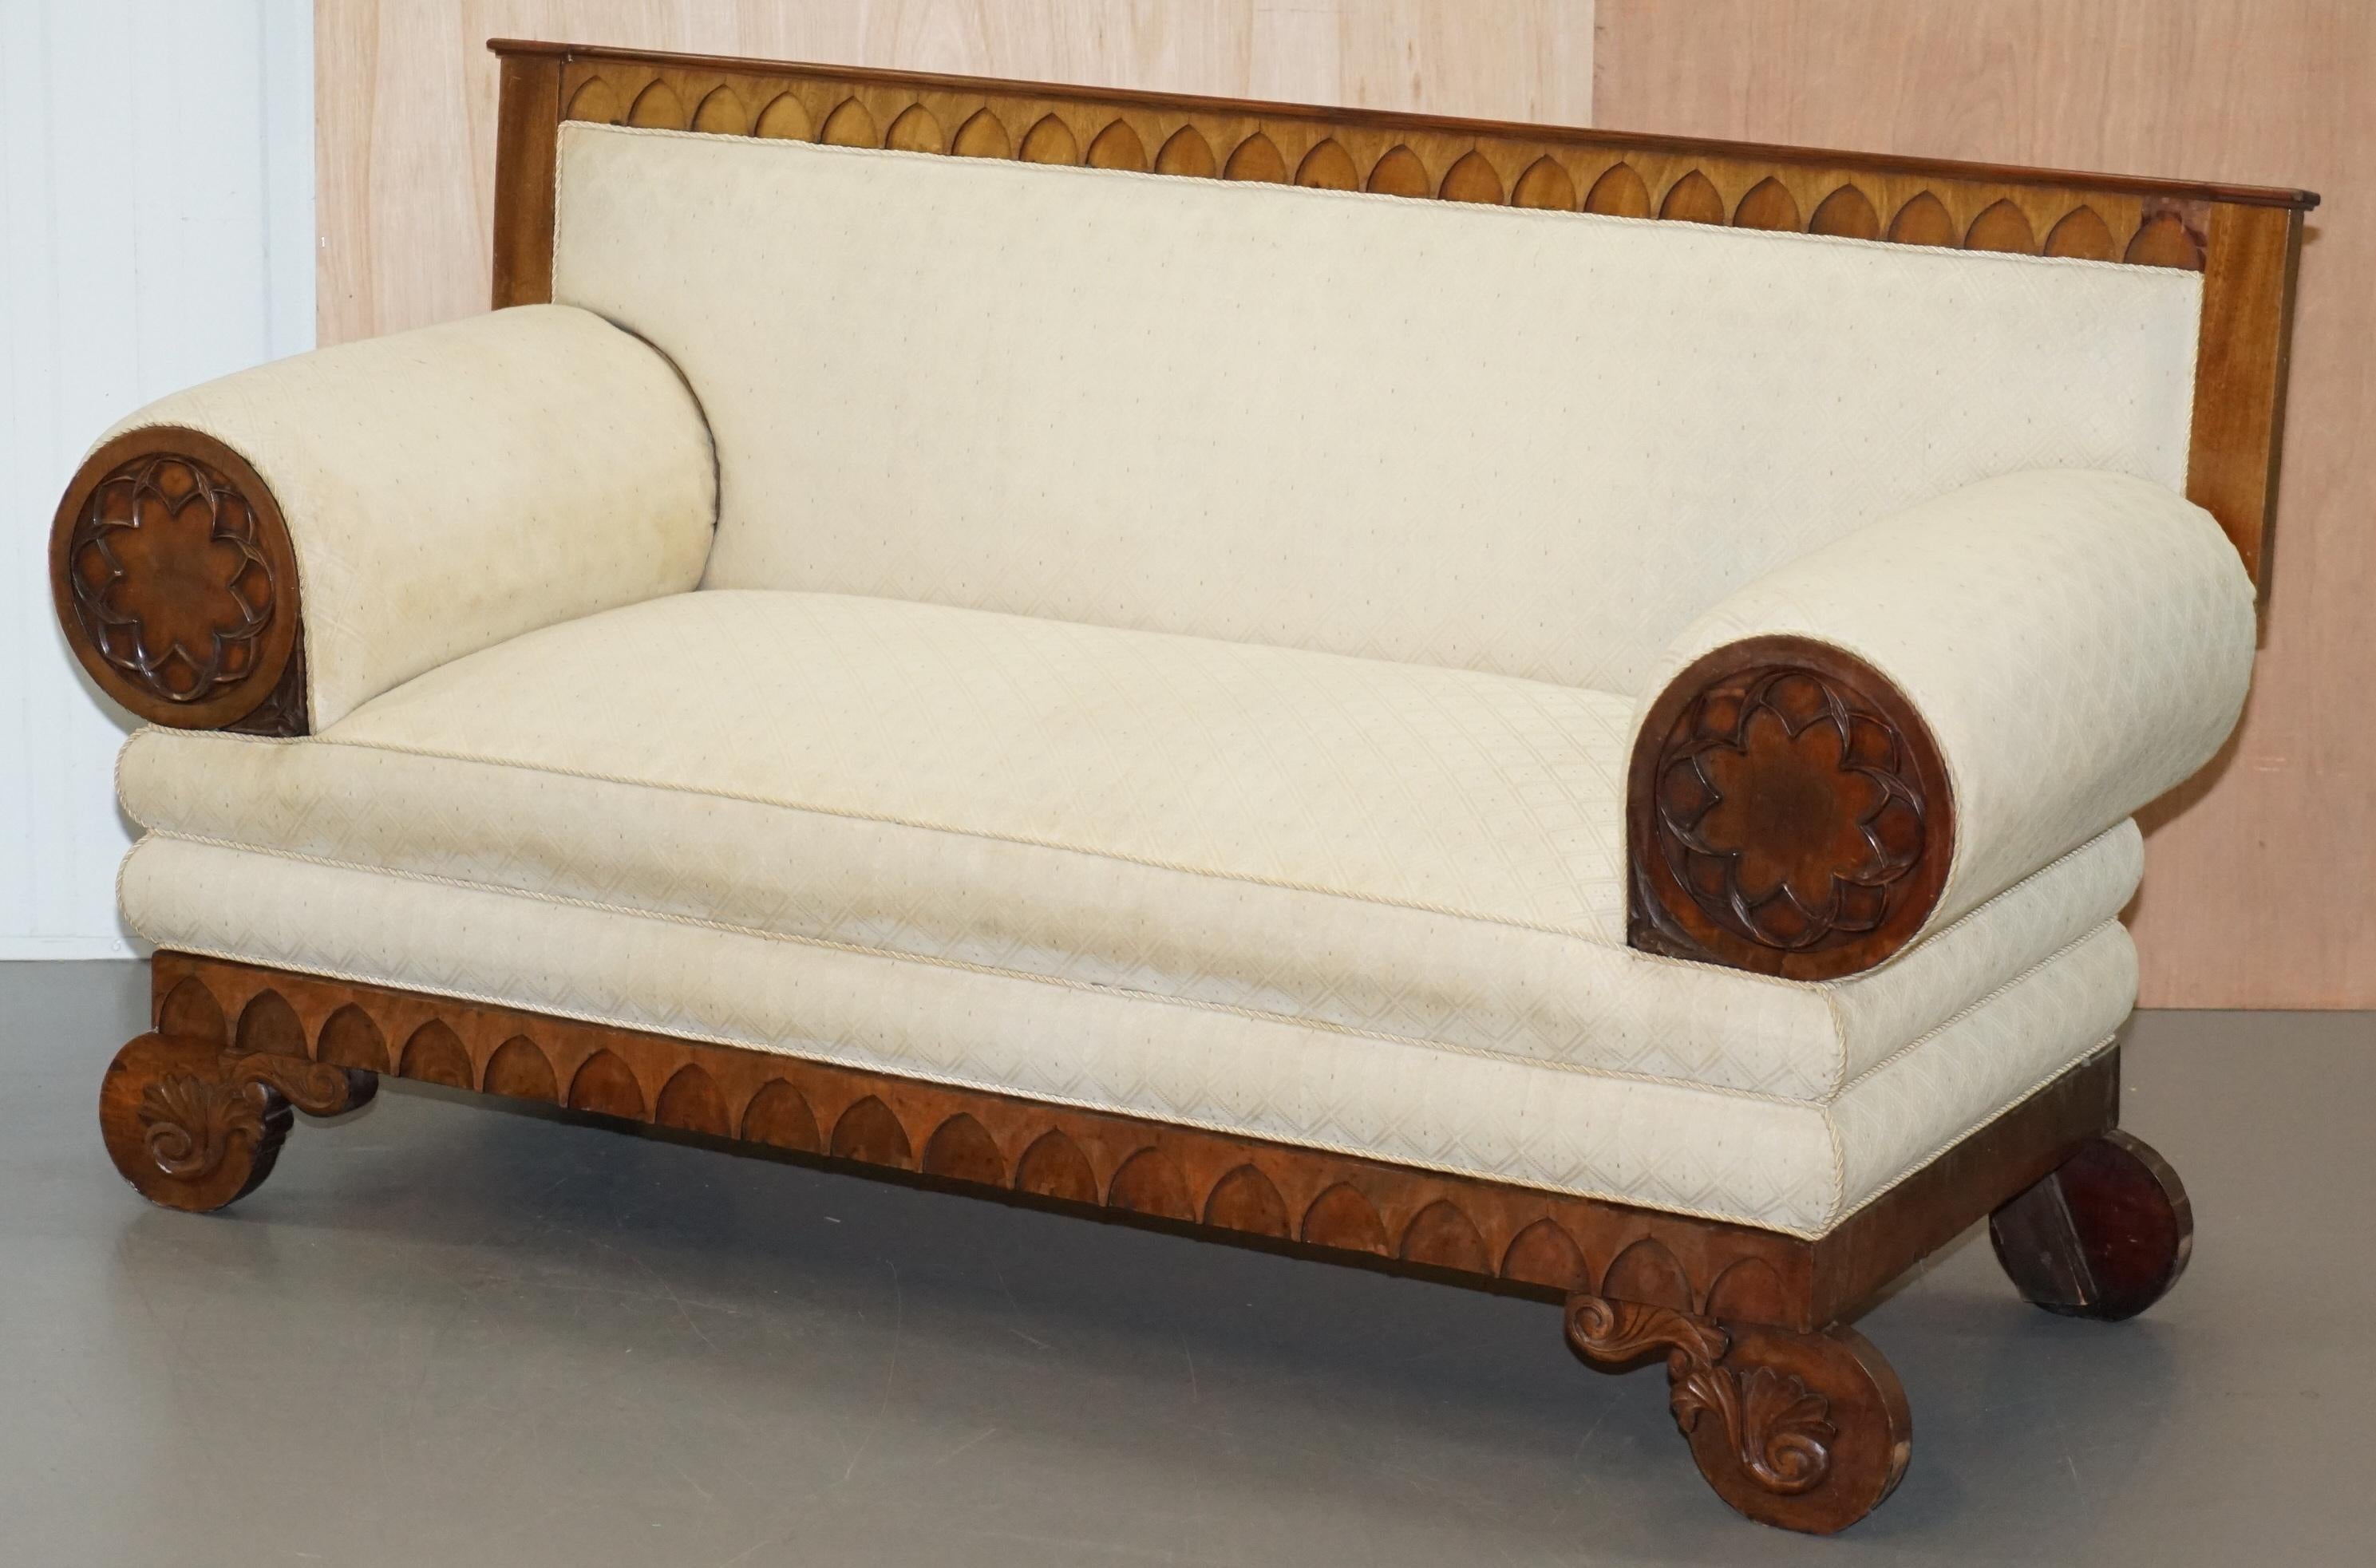 We are delighted to offer for sale this lovely circa 1780 Gothic style settee with removable back converting it into a lovely bluster armed window seat

A very good looking and well made piece, the carving is very much in the Gothic style, the